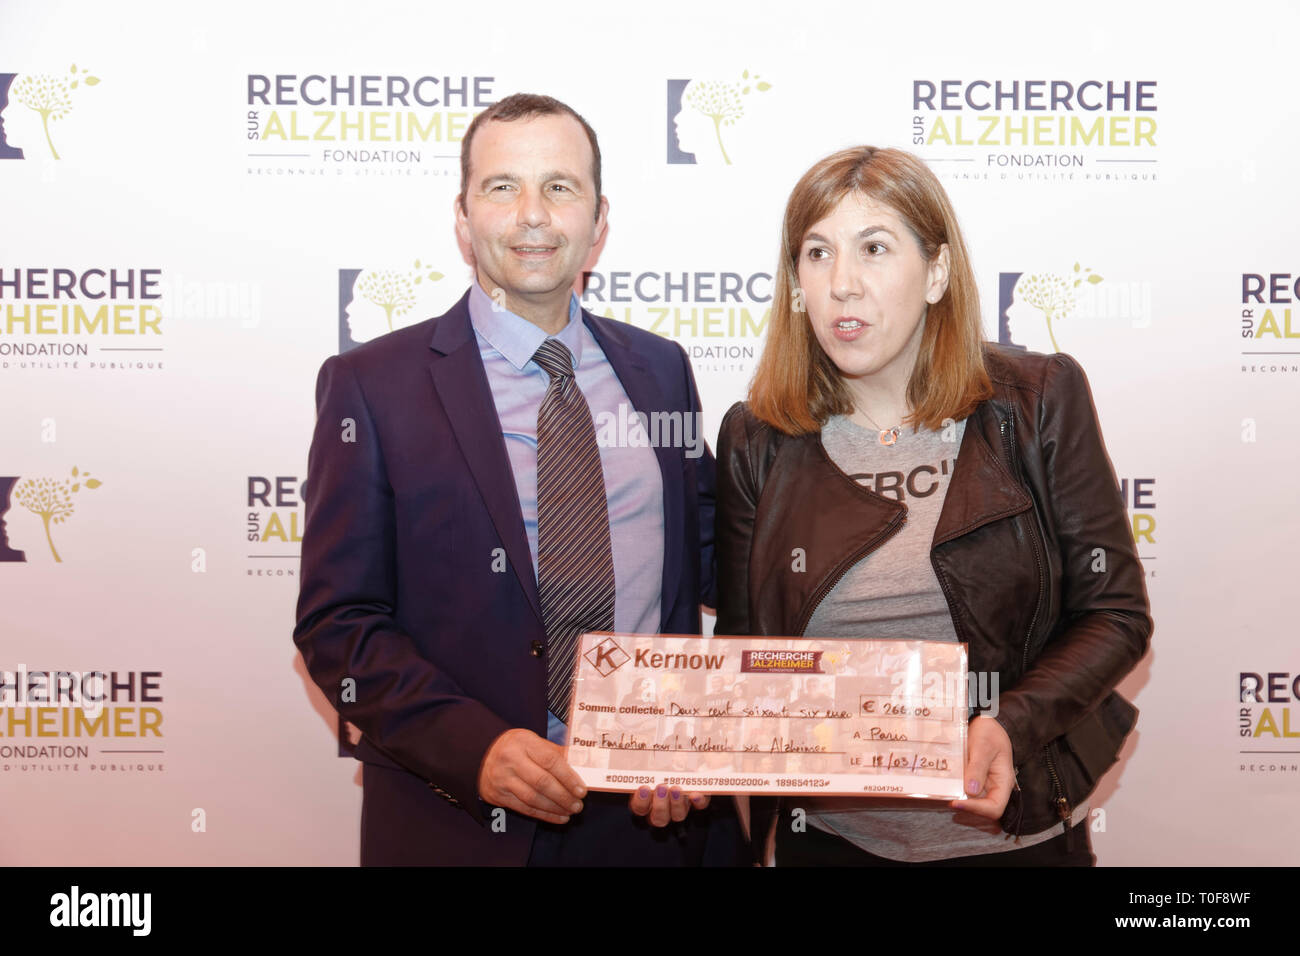 Paris, France. 18th Mar 2019. Jean-Luc Angelis and Gaelle Scelo - Photocall of the 14th Gala 2019 of the Association for Alzheimer Research at the Olympia in Paris on March 18, 2019, France. Credit: Véronique PHITOUSSI/Alamy Live News Stock Photo